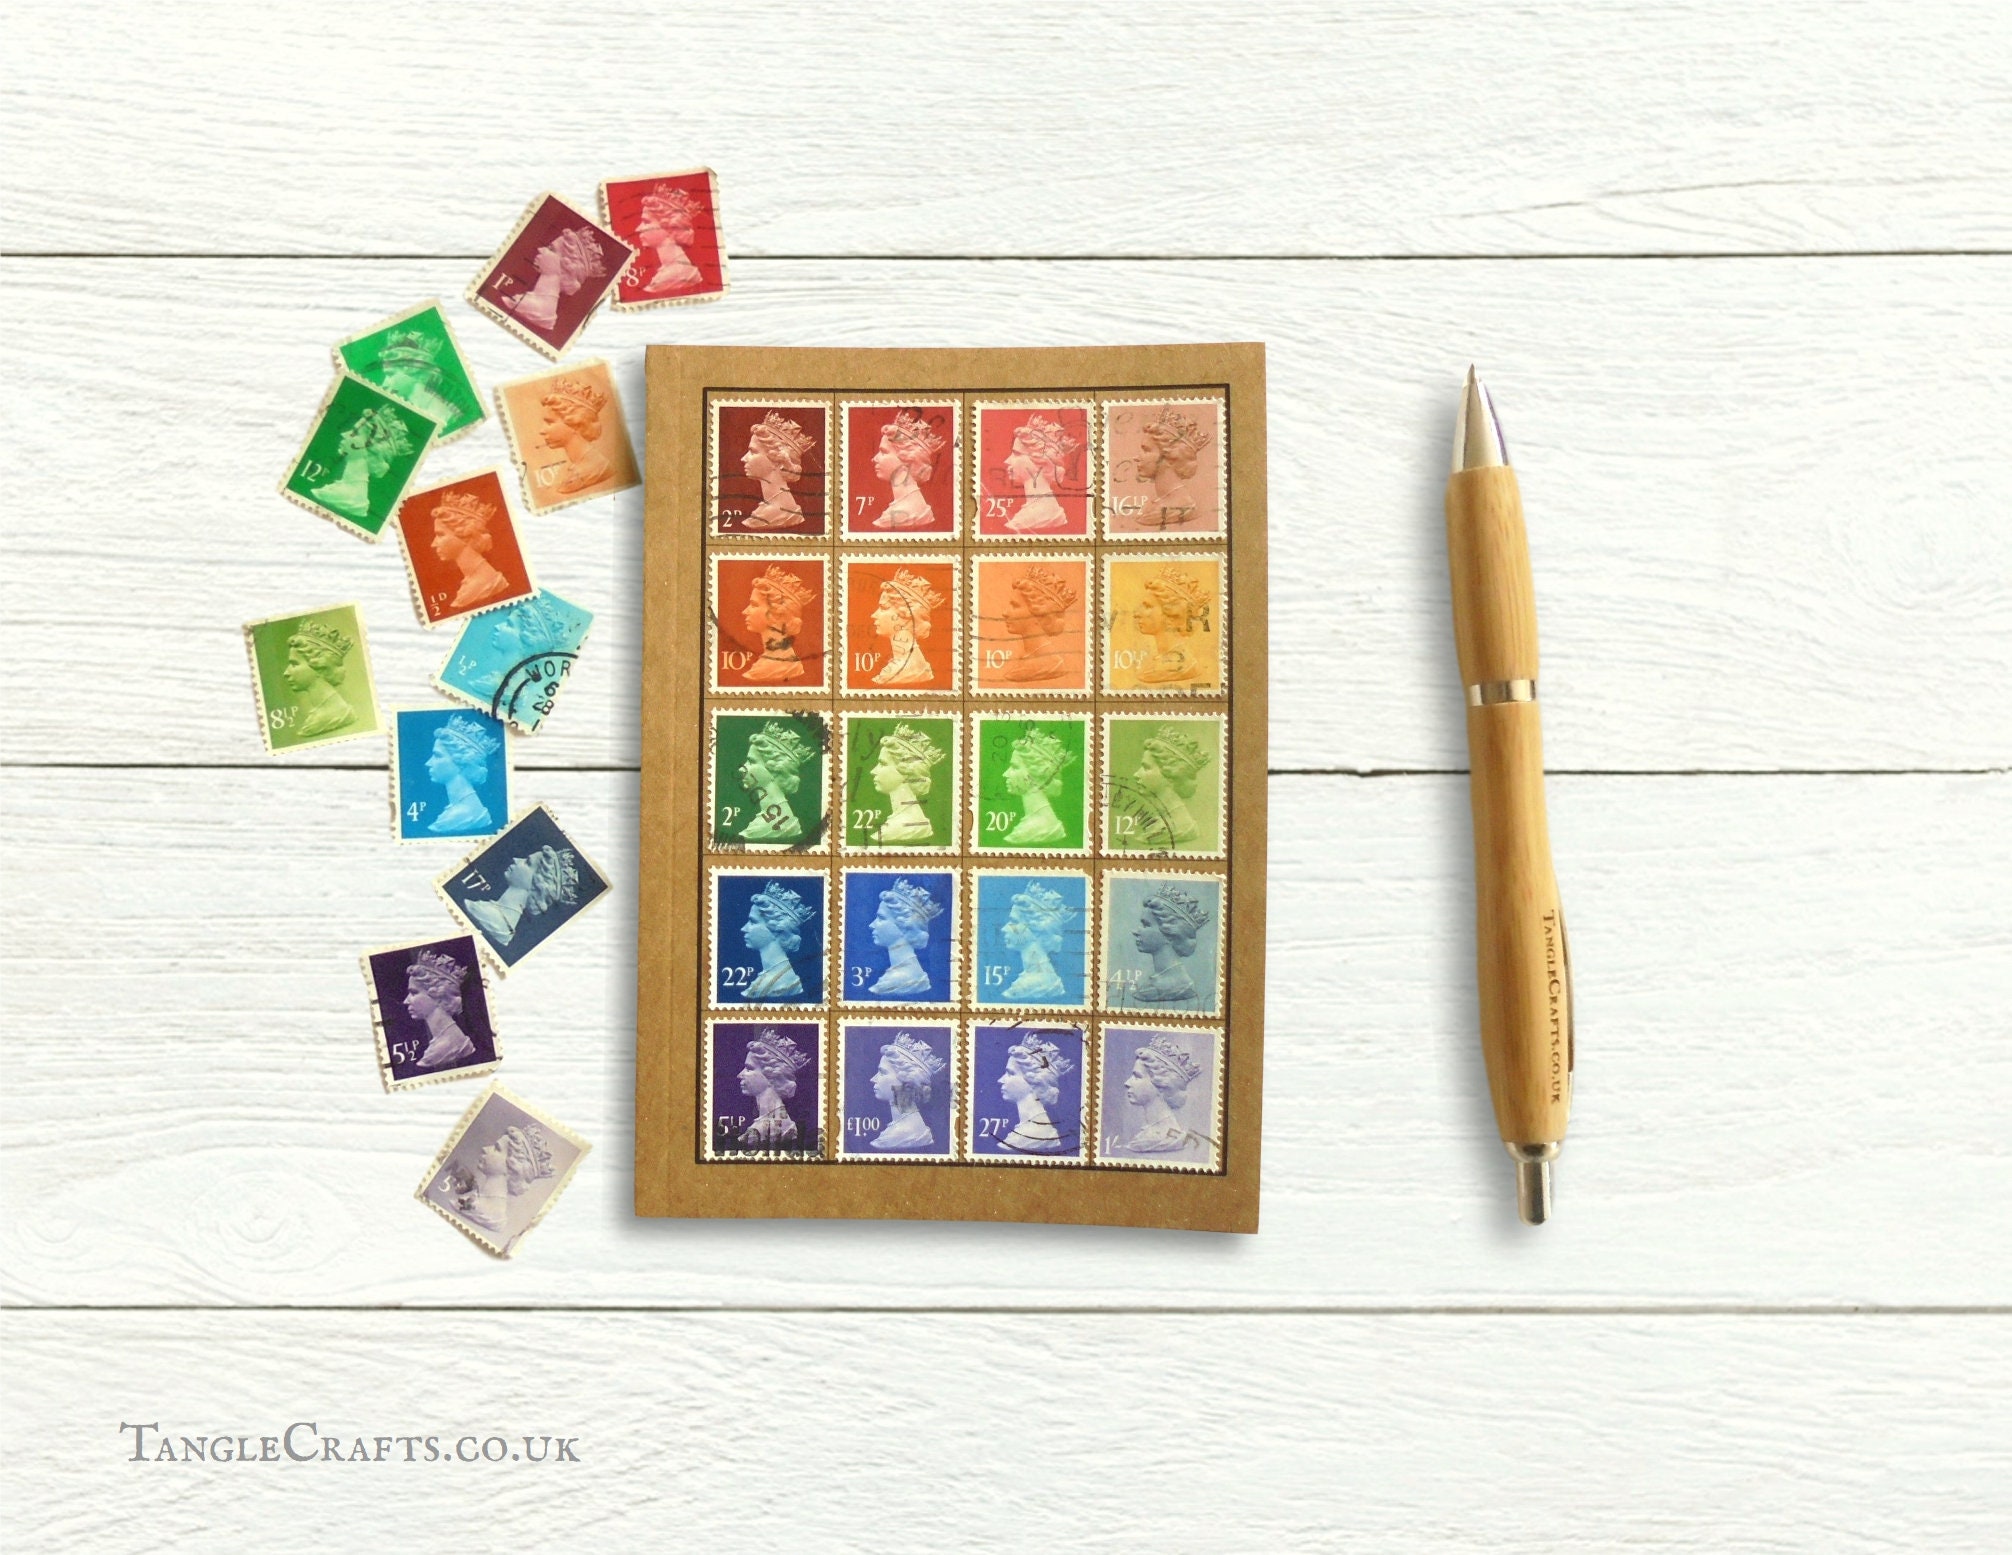 25 used rainbow old British postage stamps, all different, all off paper -  for scrapbooking, stamp collecting and crafting